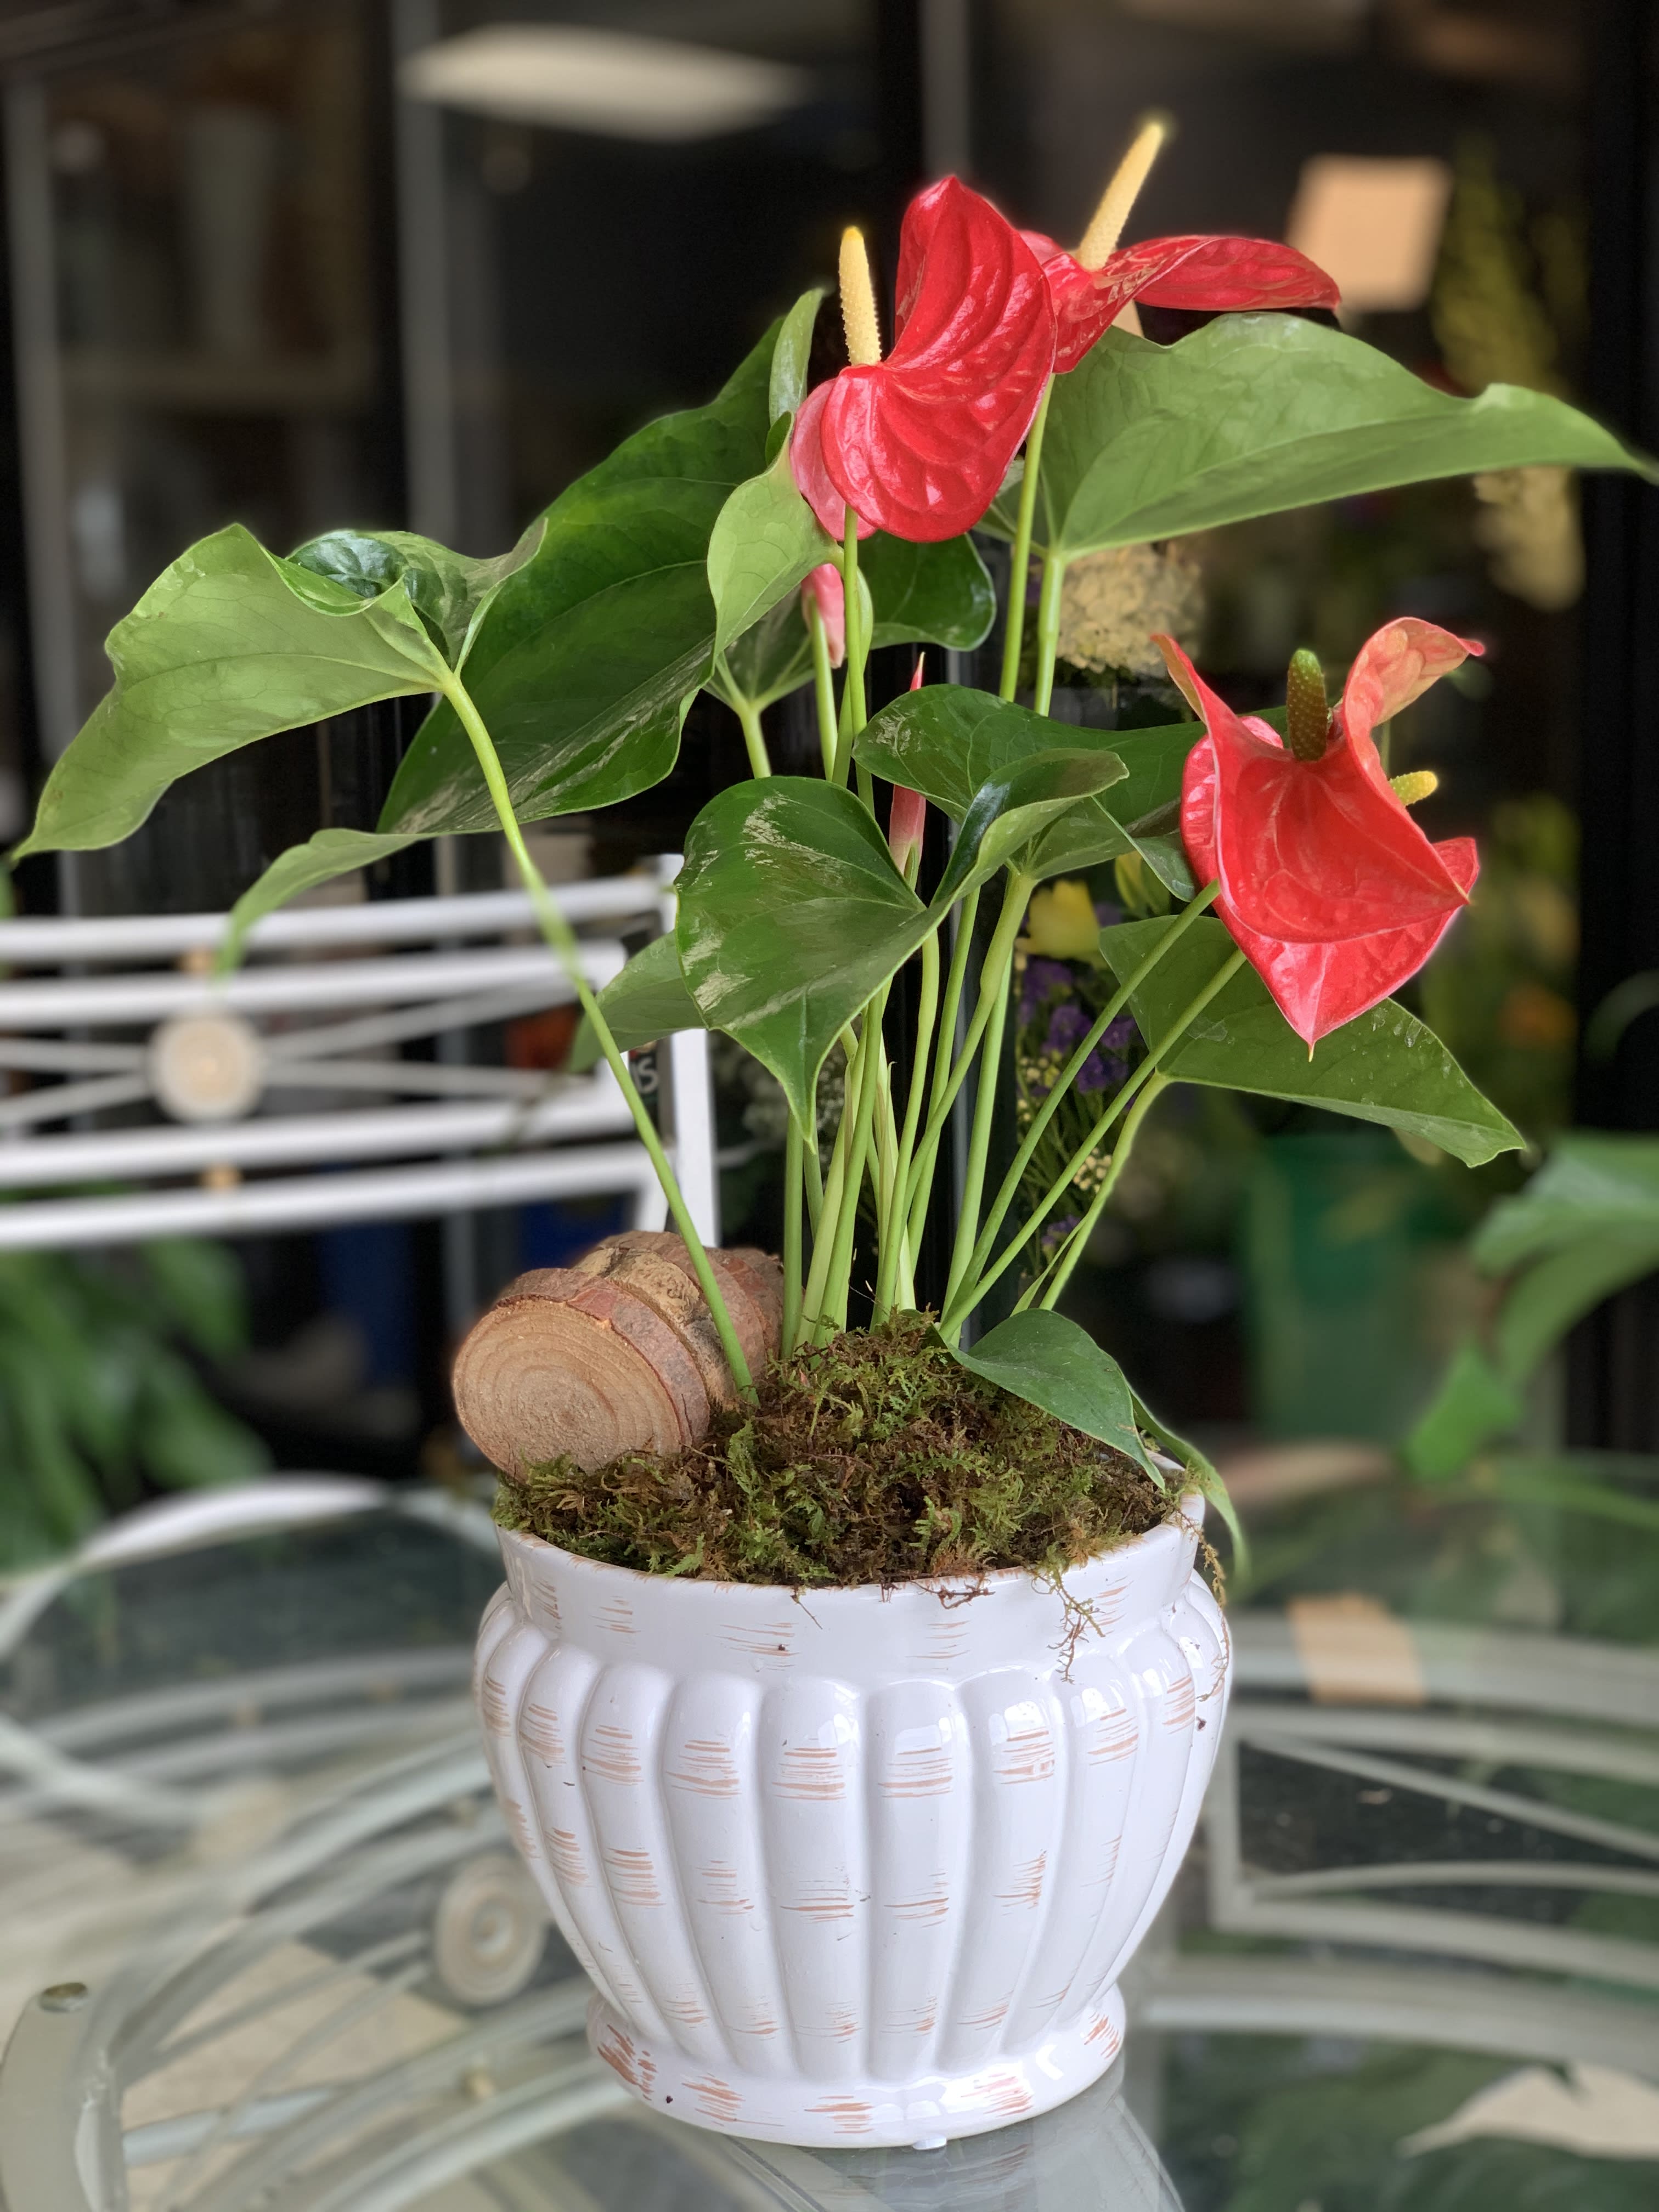 Anthurium Indoor Plant - In a keepsake white ceramic planter, these gorgeous plant is perfect for any occasion. It may come in red or pink.